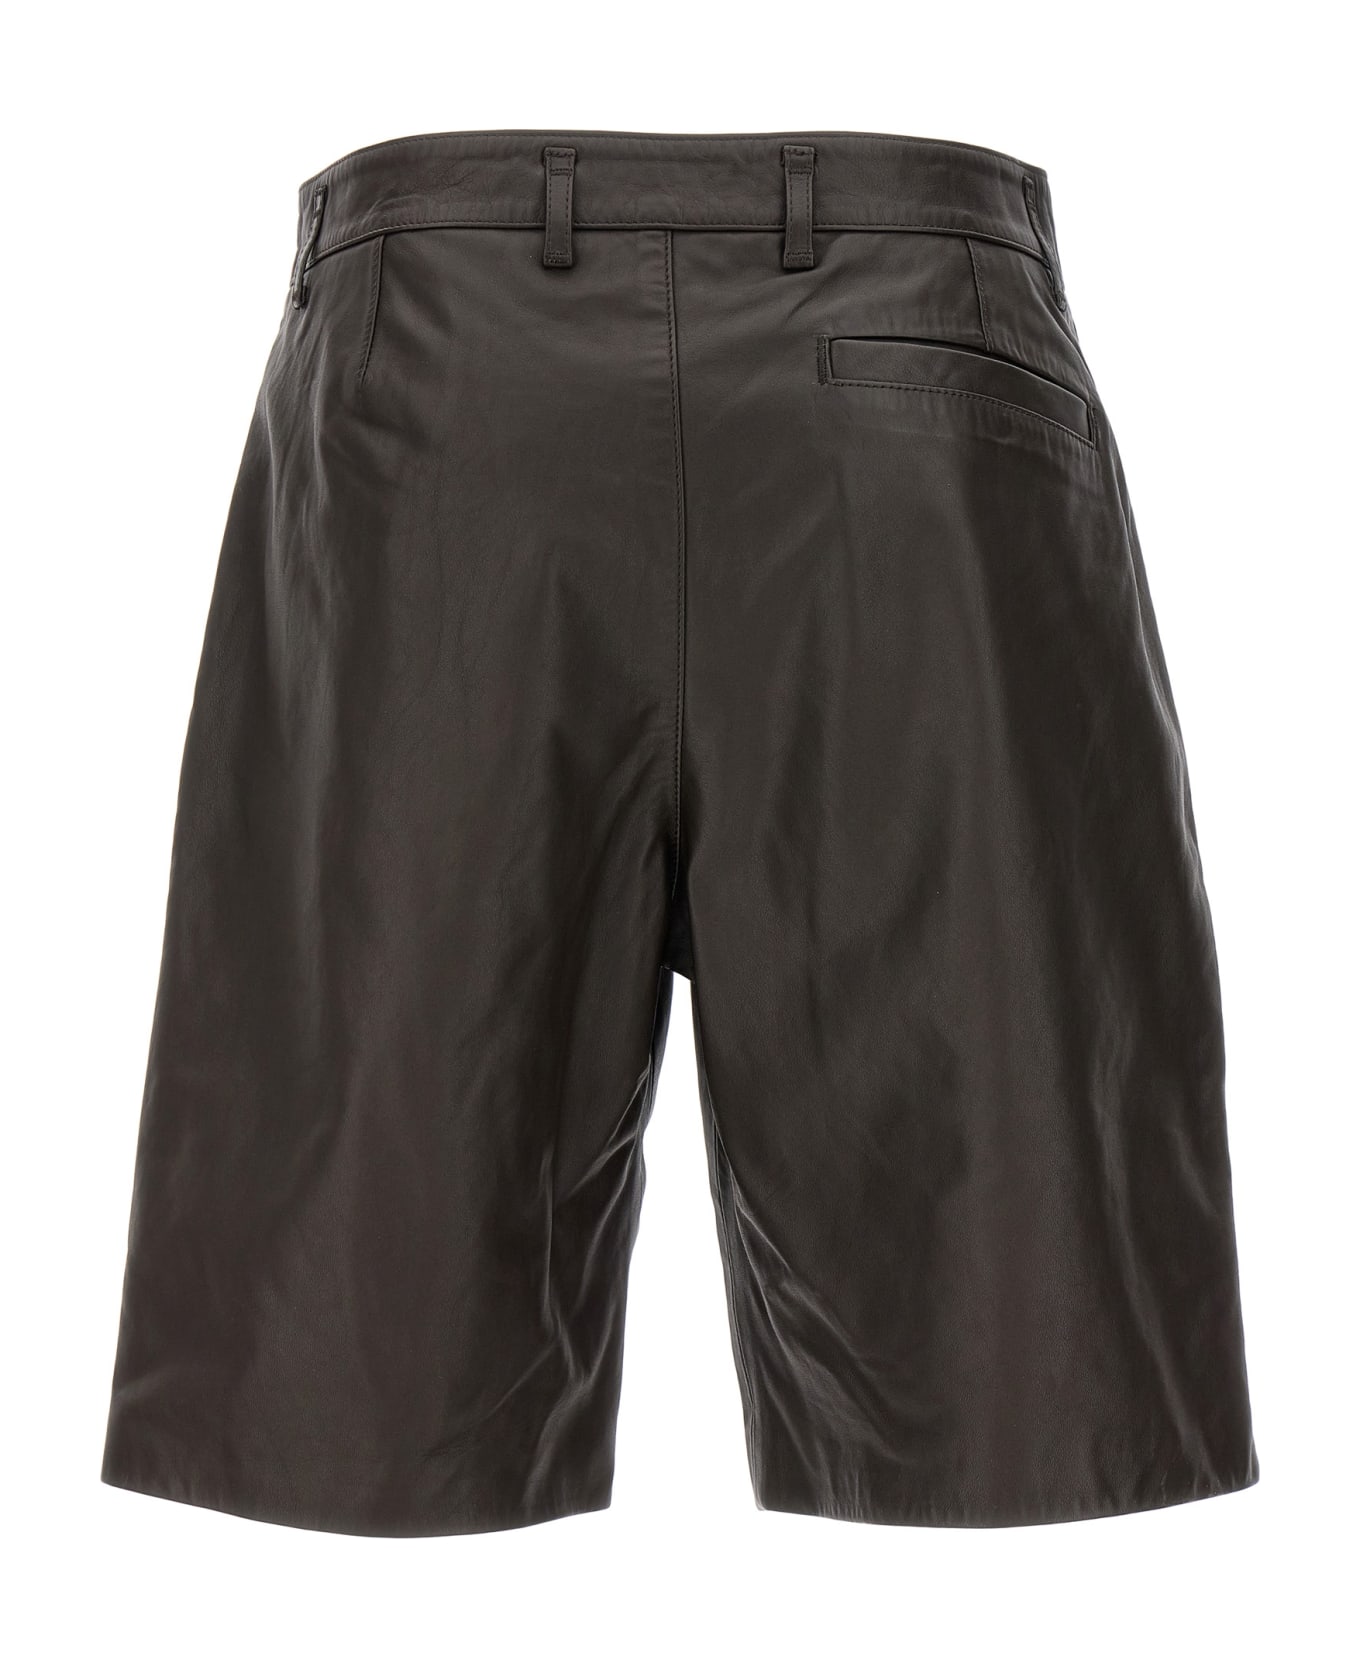 Lemaire Leather Bermuda Shorts - BROWN